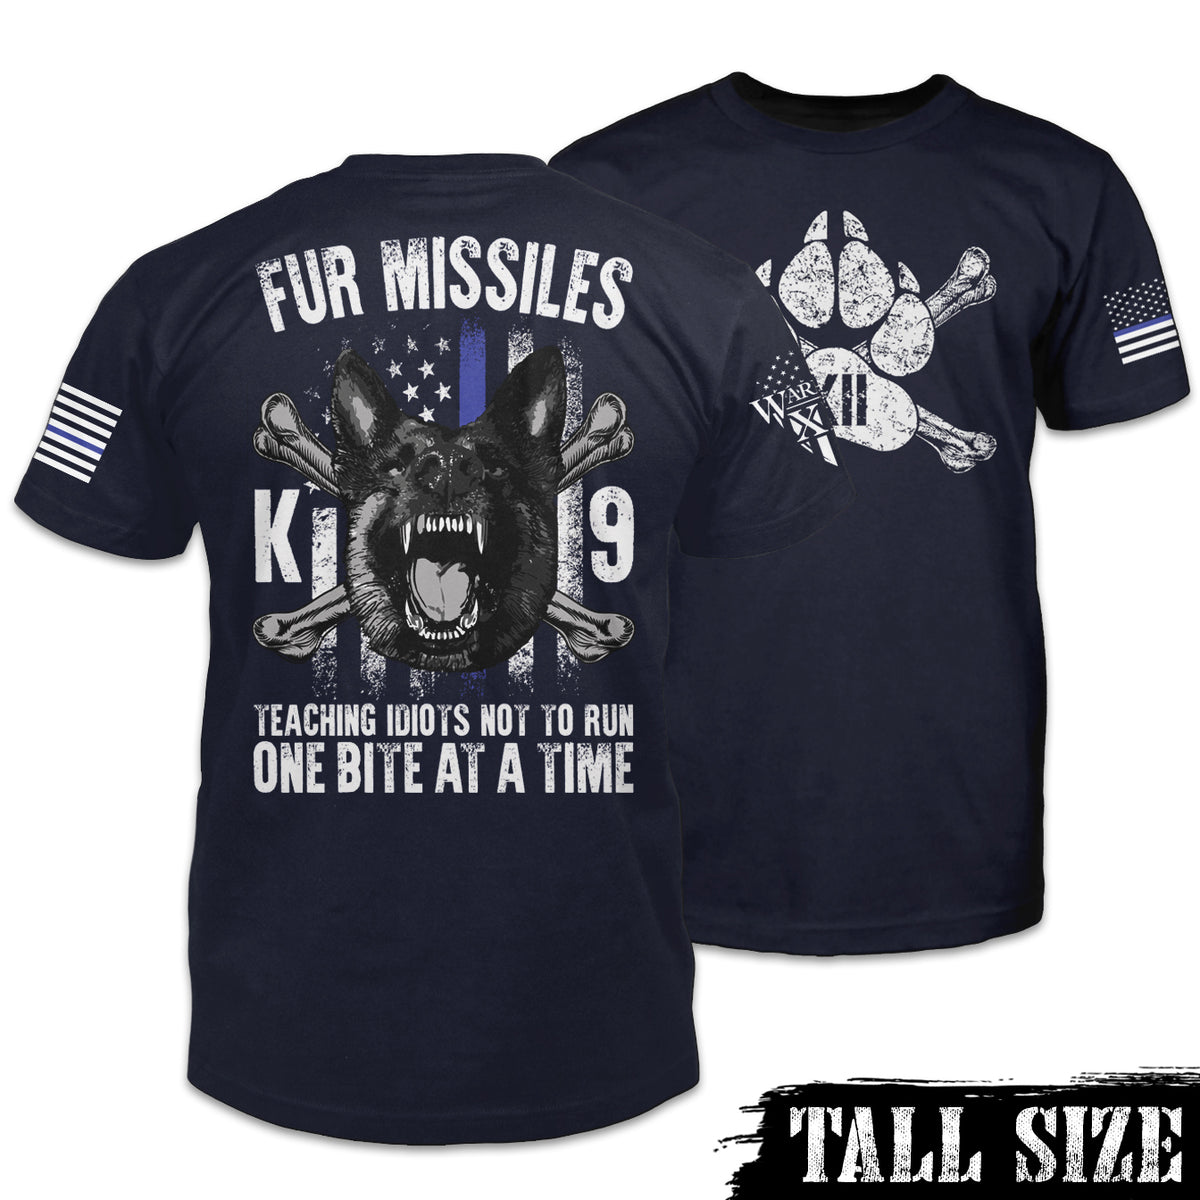 Front & back navy blue tall size shirt with the words "Fur Missiles, Teaching Idiots Not To Run, One Bite At A Time!" featuring a german shepherd showing teeth in front of a thin blue line USA flag printed on the shirt.